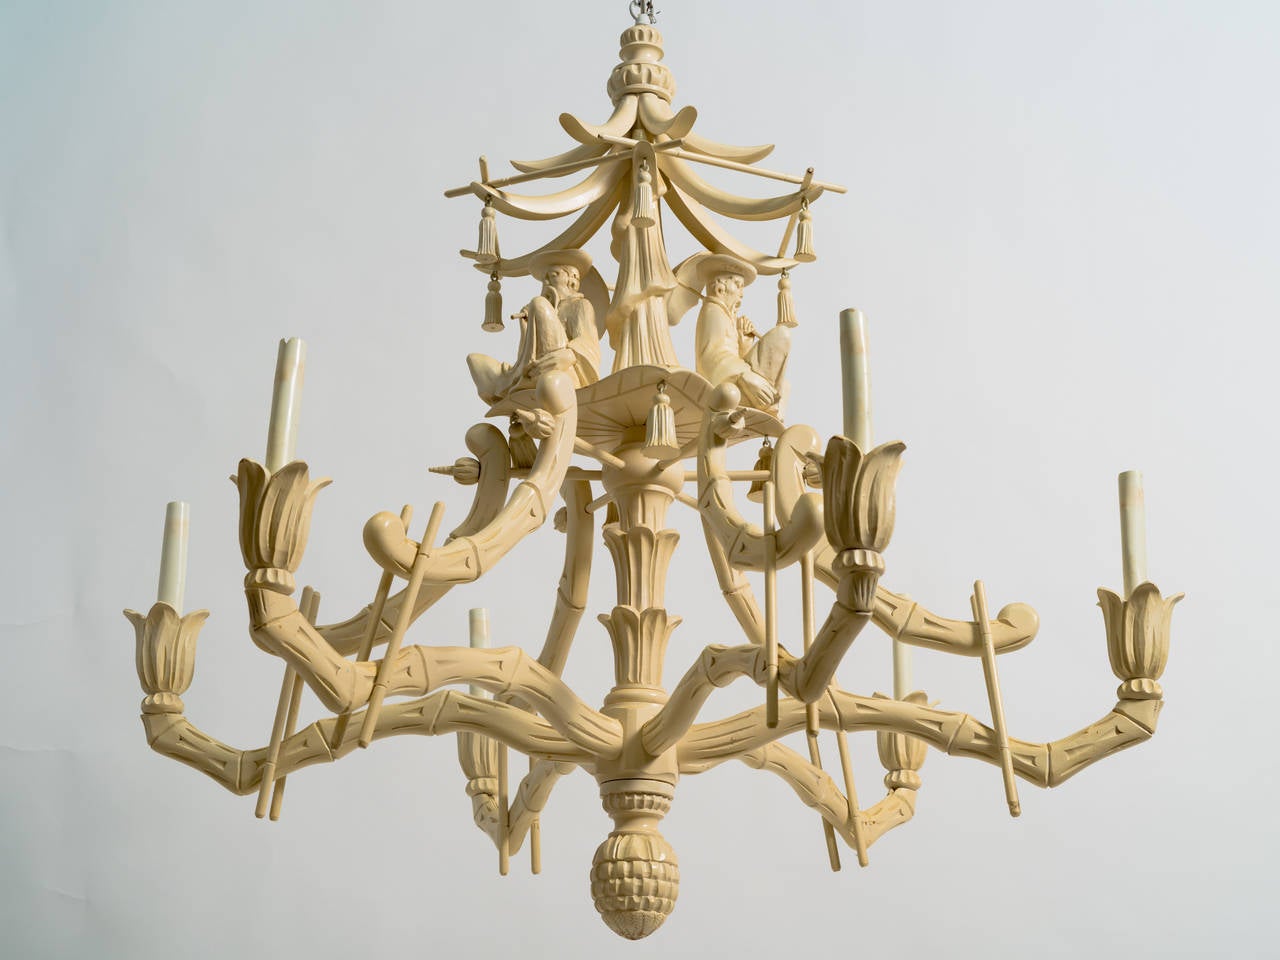 Asian modern carved wood pagoda chandelier. It has 6 lights.